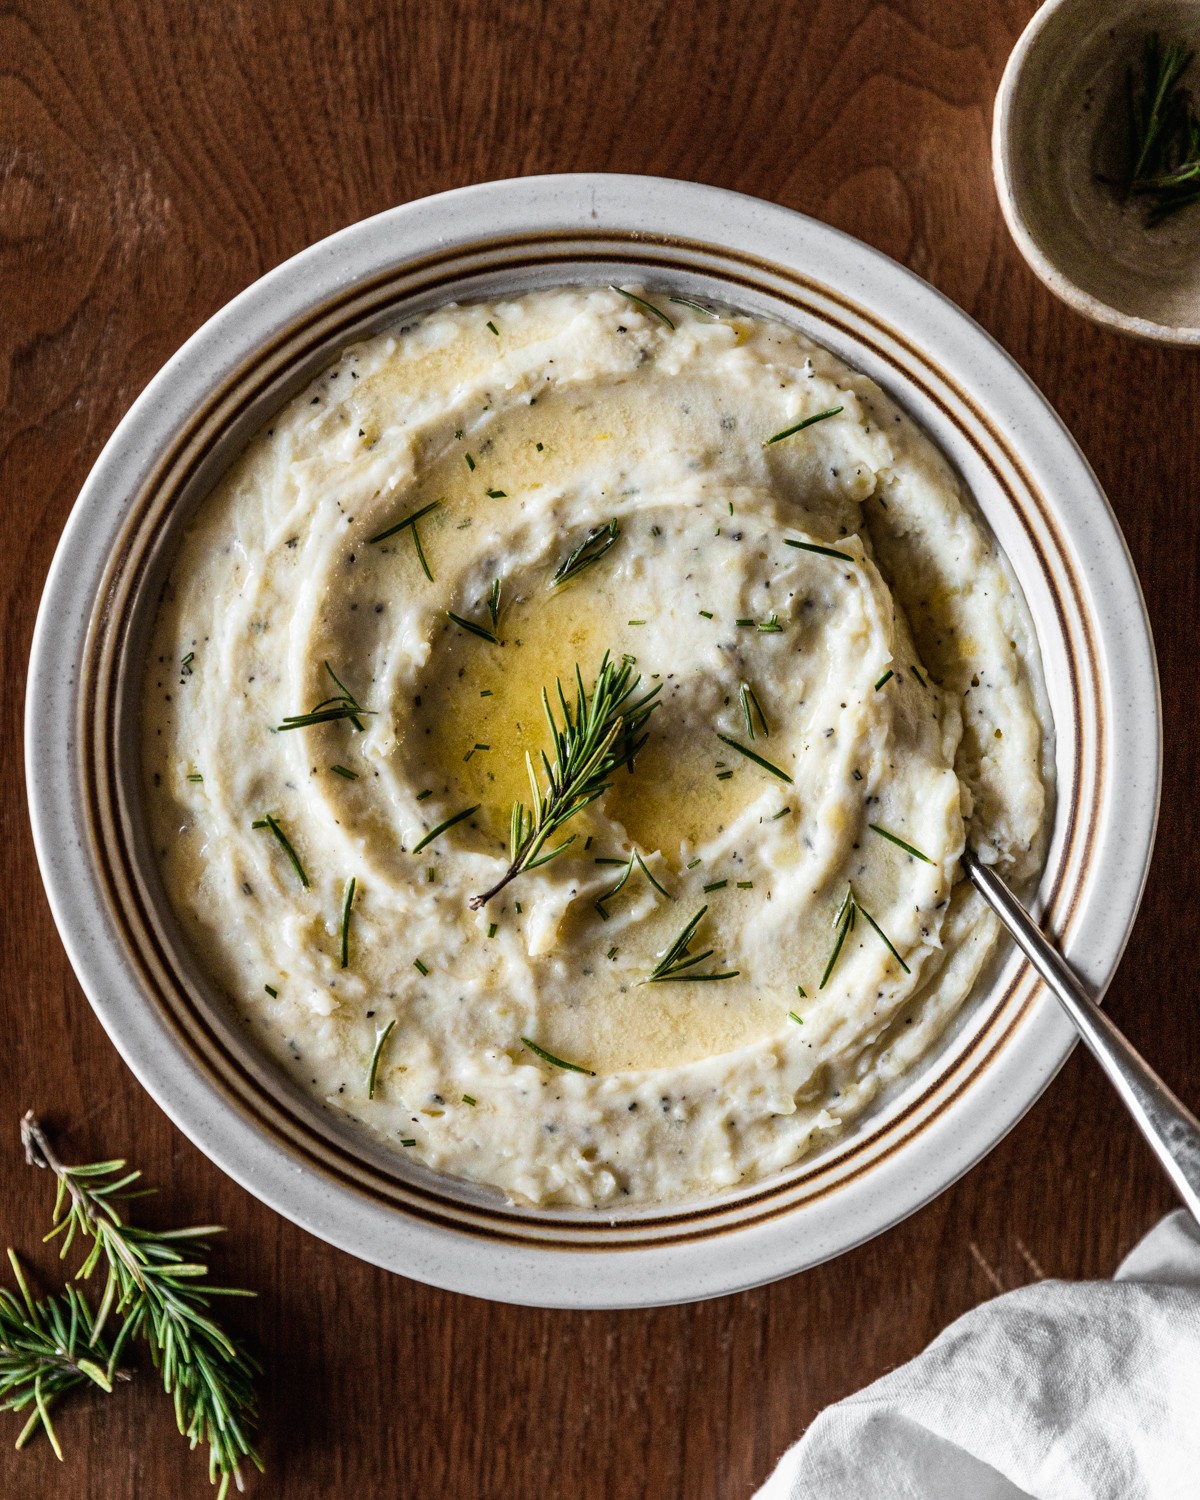 A very closeup overhead image of a white bowl of cheddar mashed potatoes garnished with butter and rosemary on a wood table next to a white linen and sprigs of rosemary.